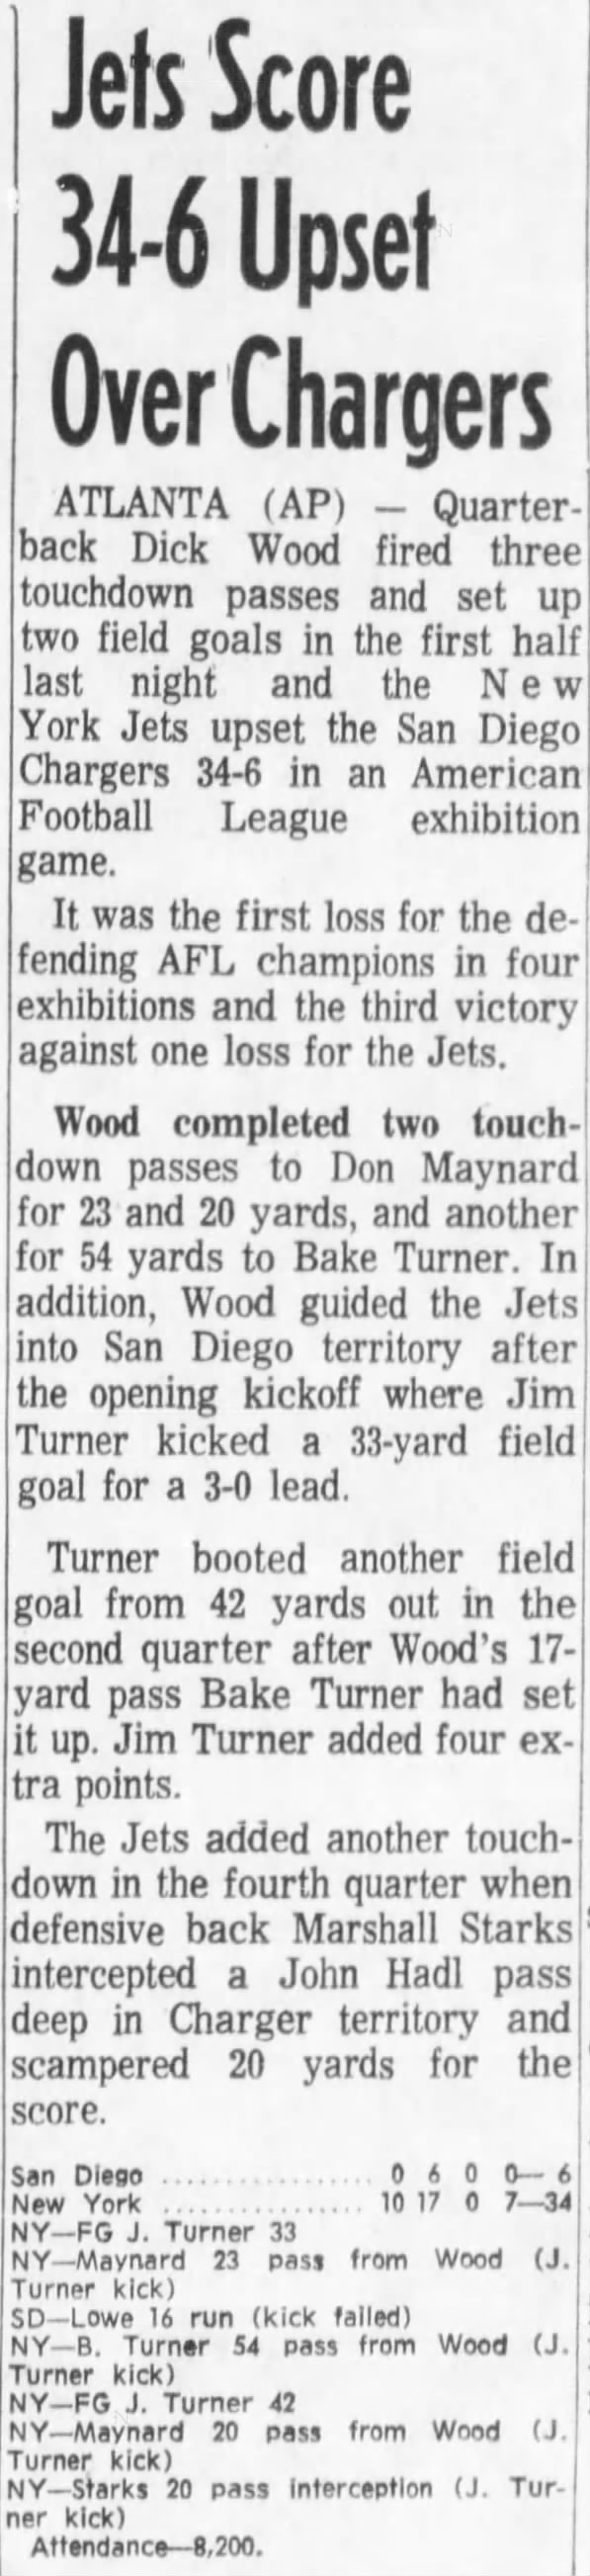 Chargers 6-34 Jets, 30 Aug 1964